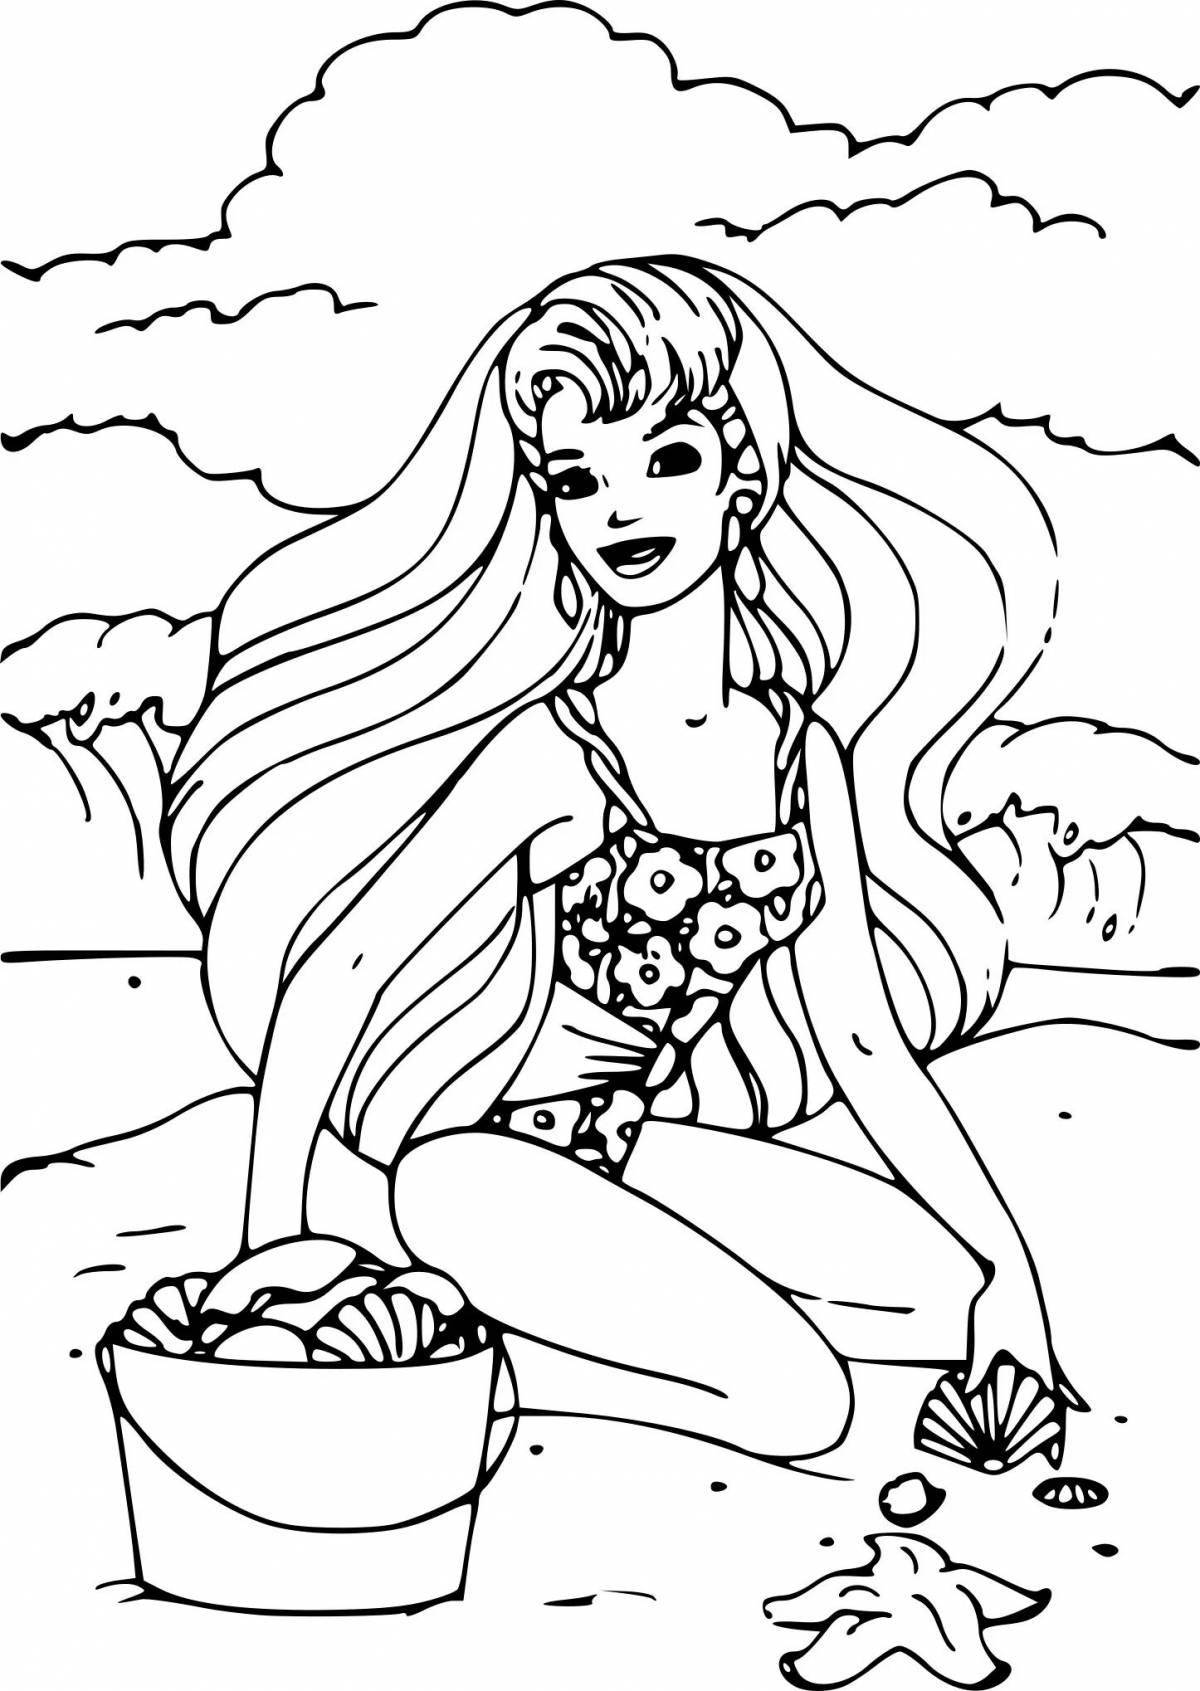 Beautiful barbie coloring page on the beach